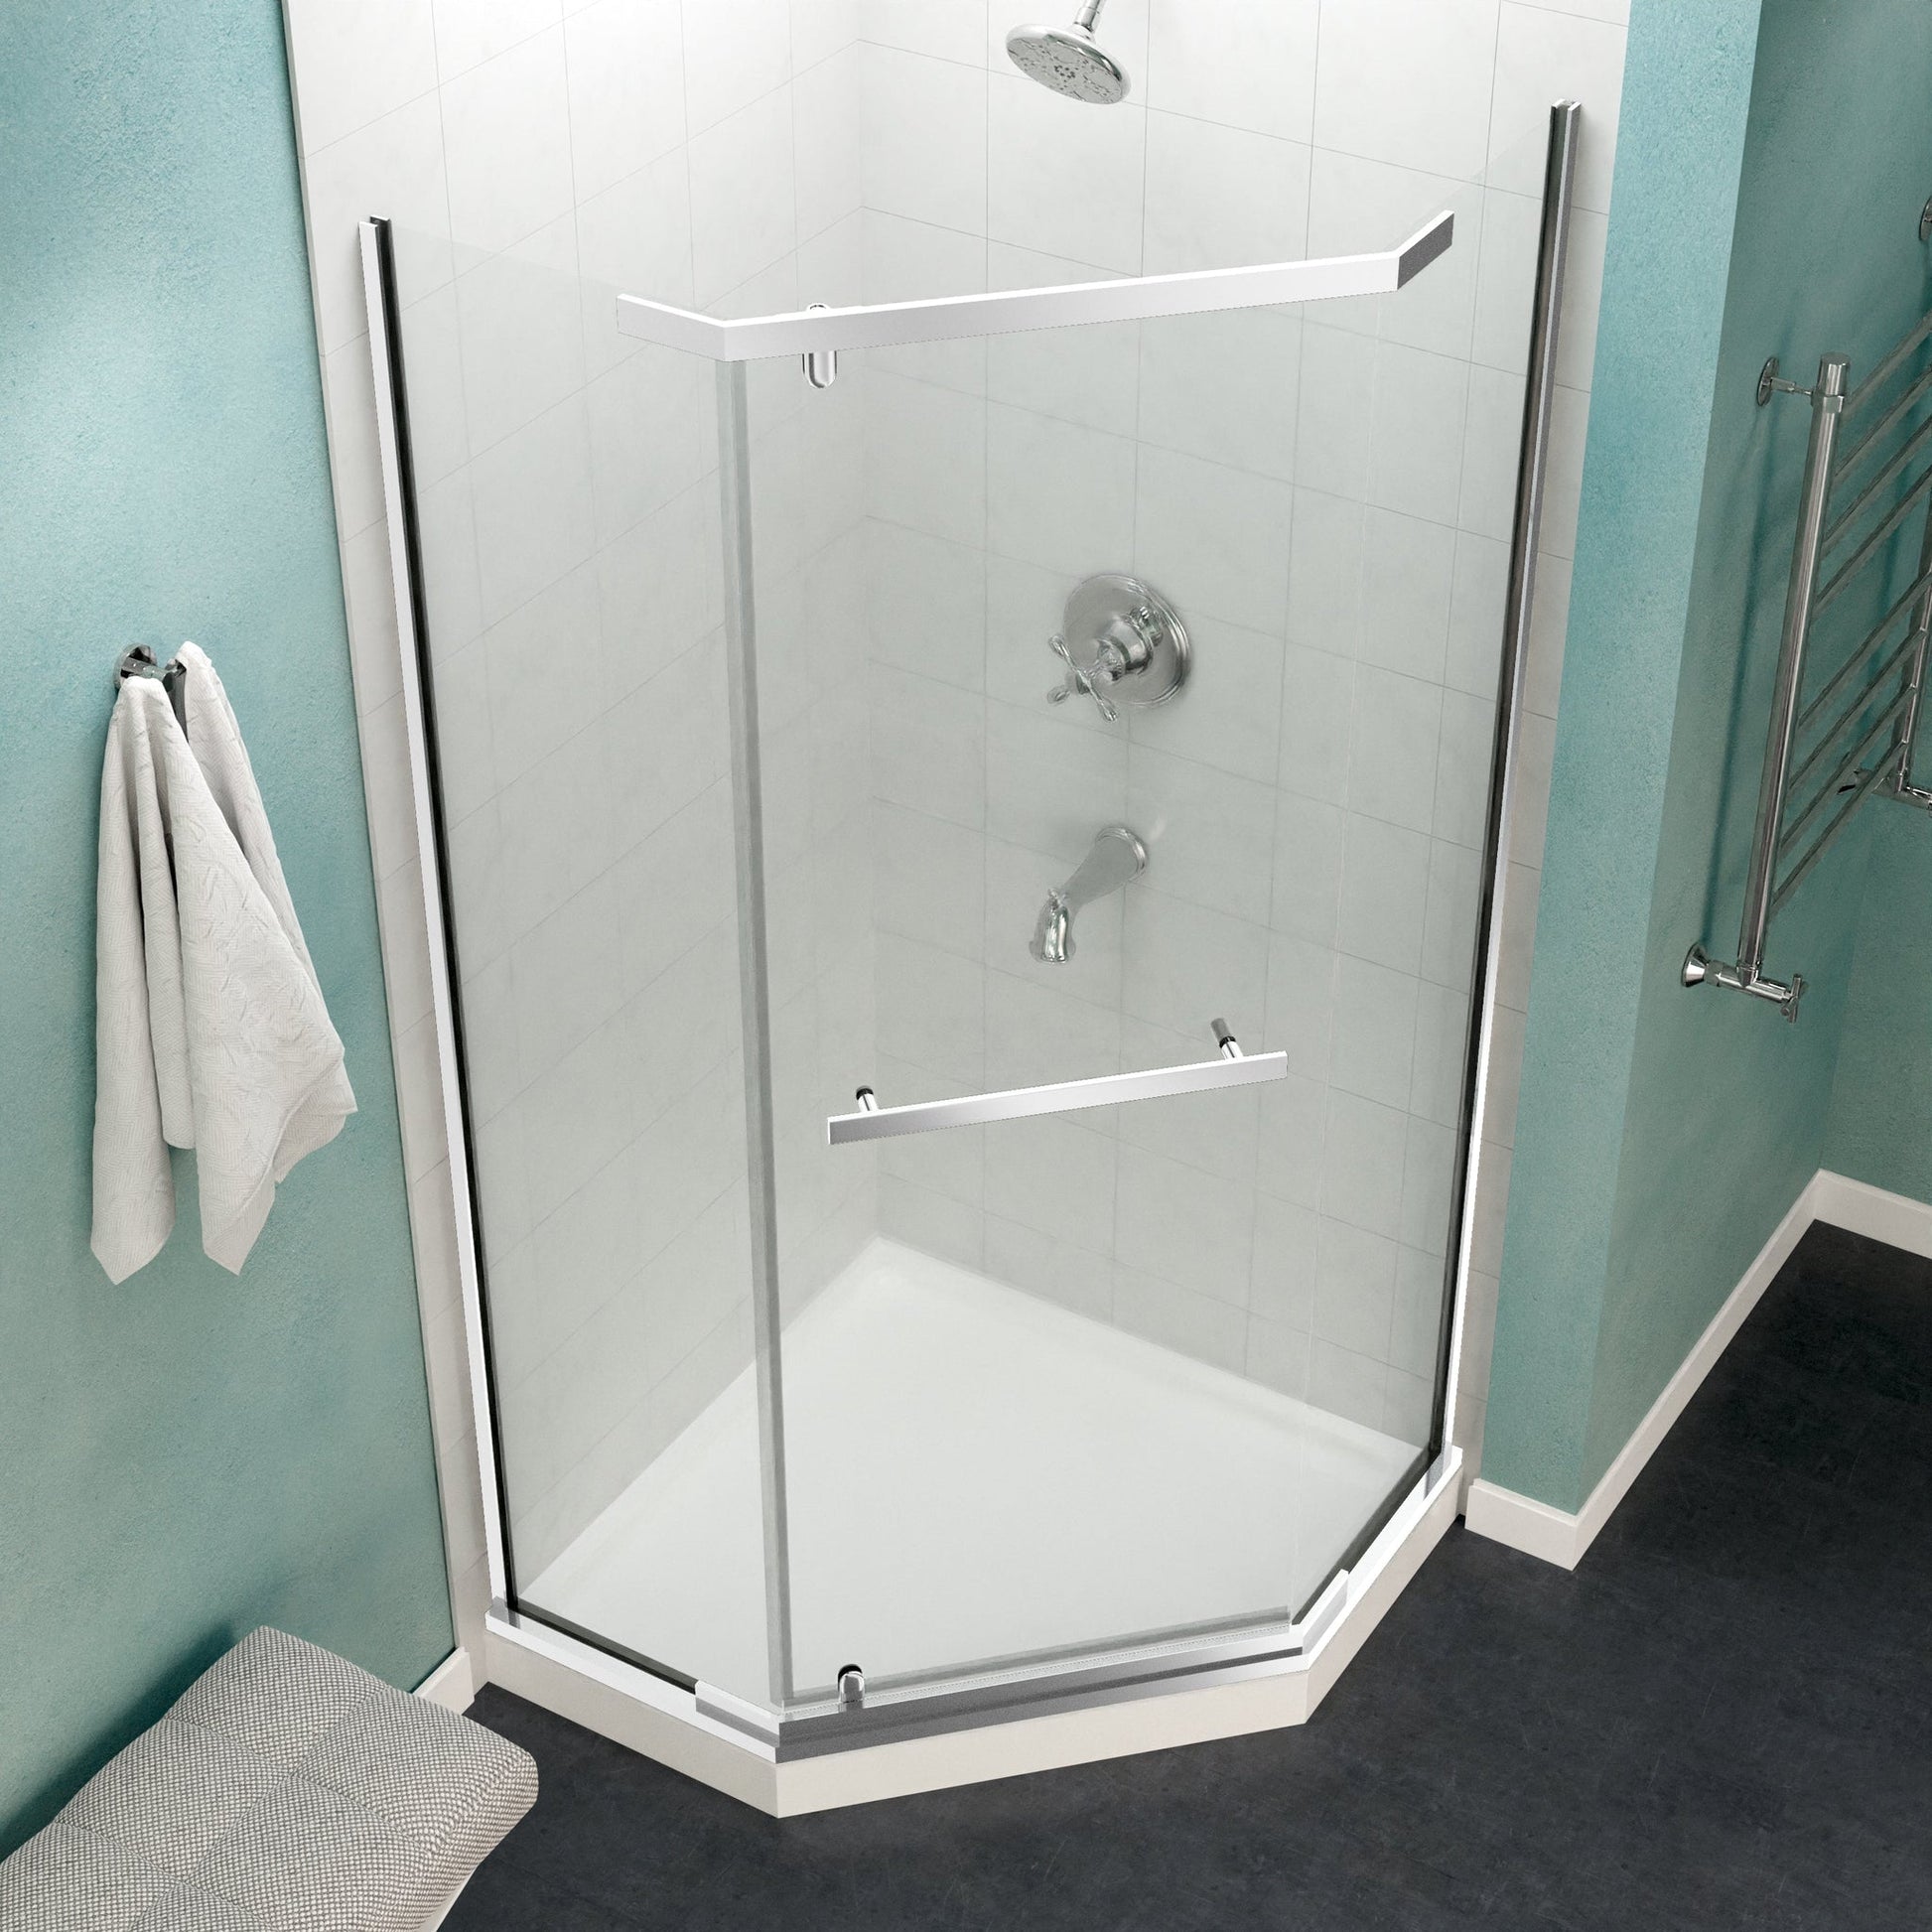 ANZZI Castle Series 49" x 72" Semi-Frameless Neo-Angle Polished Chrome Hinged Shower Door With Handle and Tsunami Guard